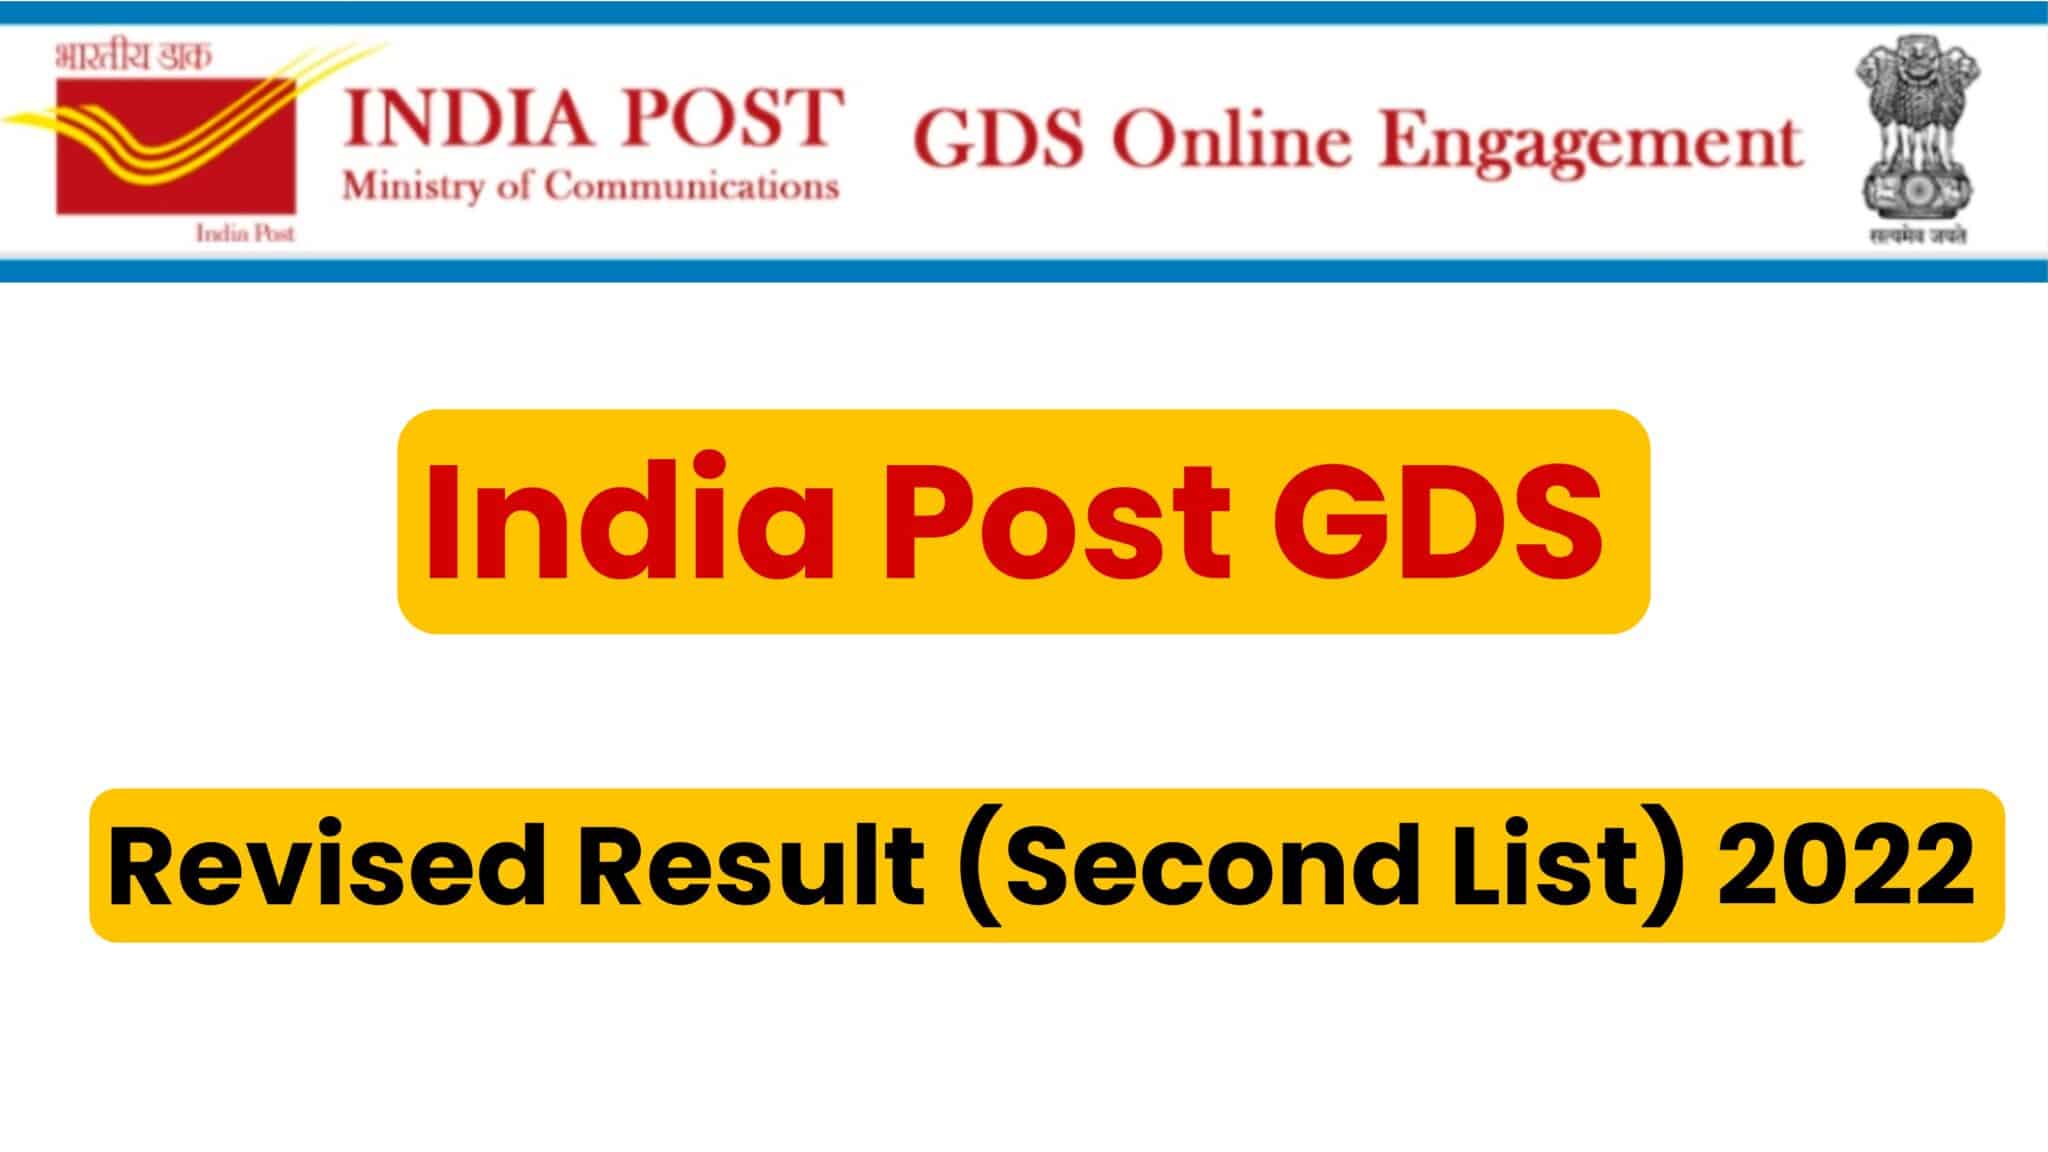 India Post GDS Revised Result (Second List) 2022